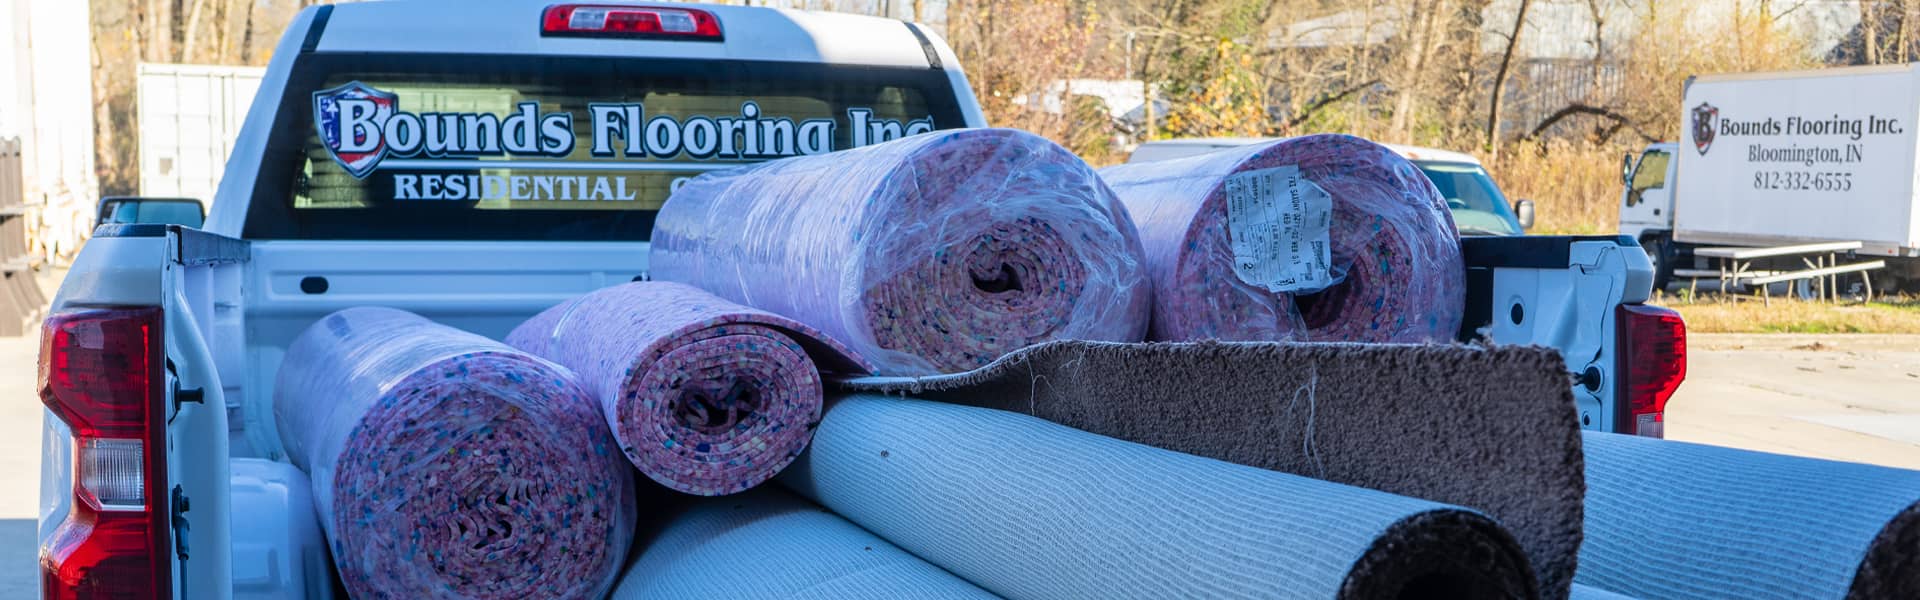 Bounds Flooring Inc. truck loaded with rolls of carpet and padding.